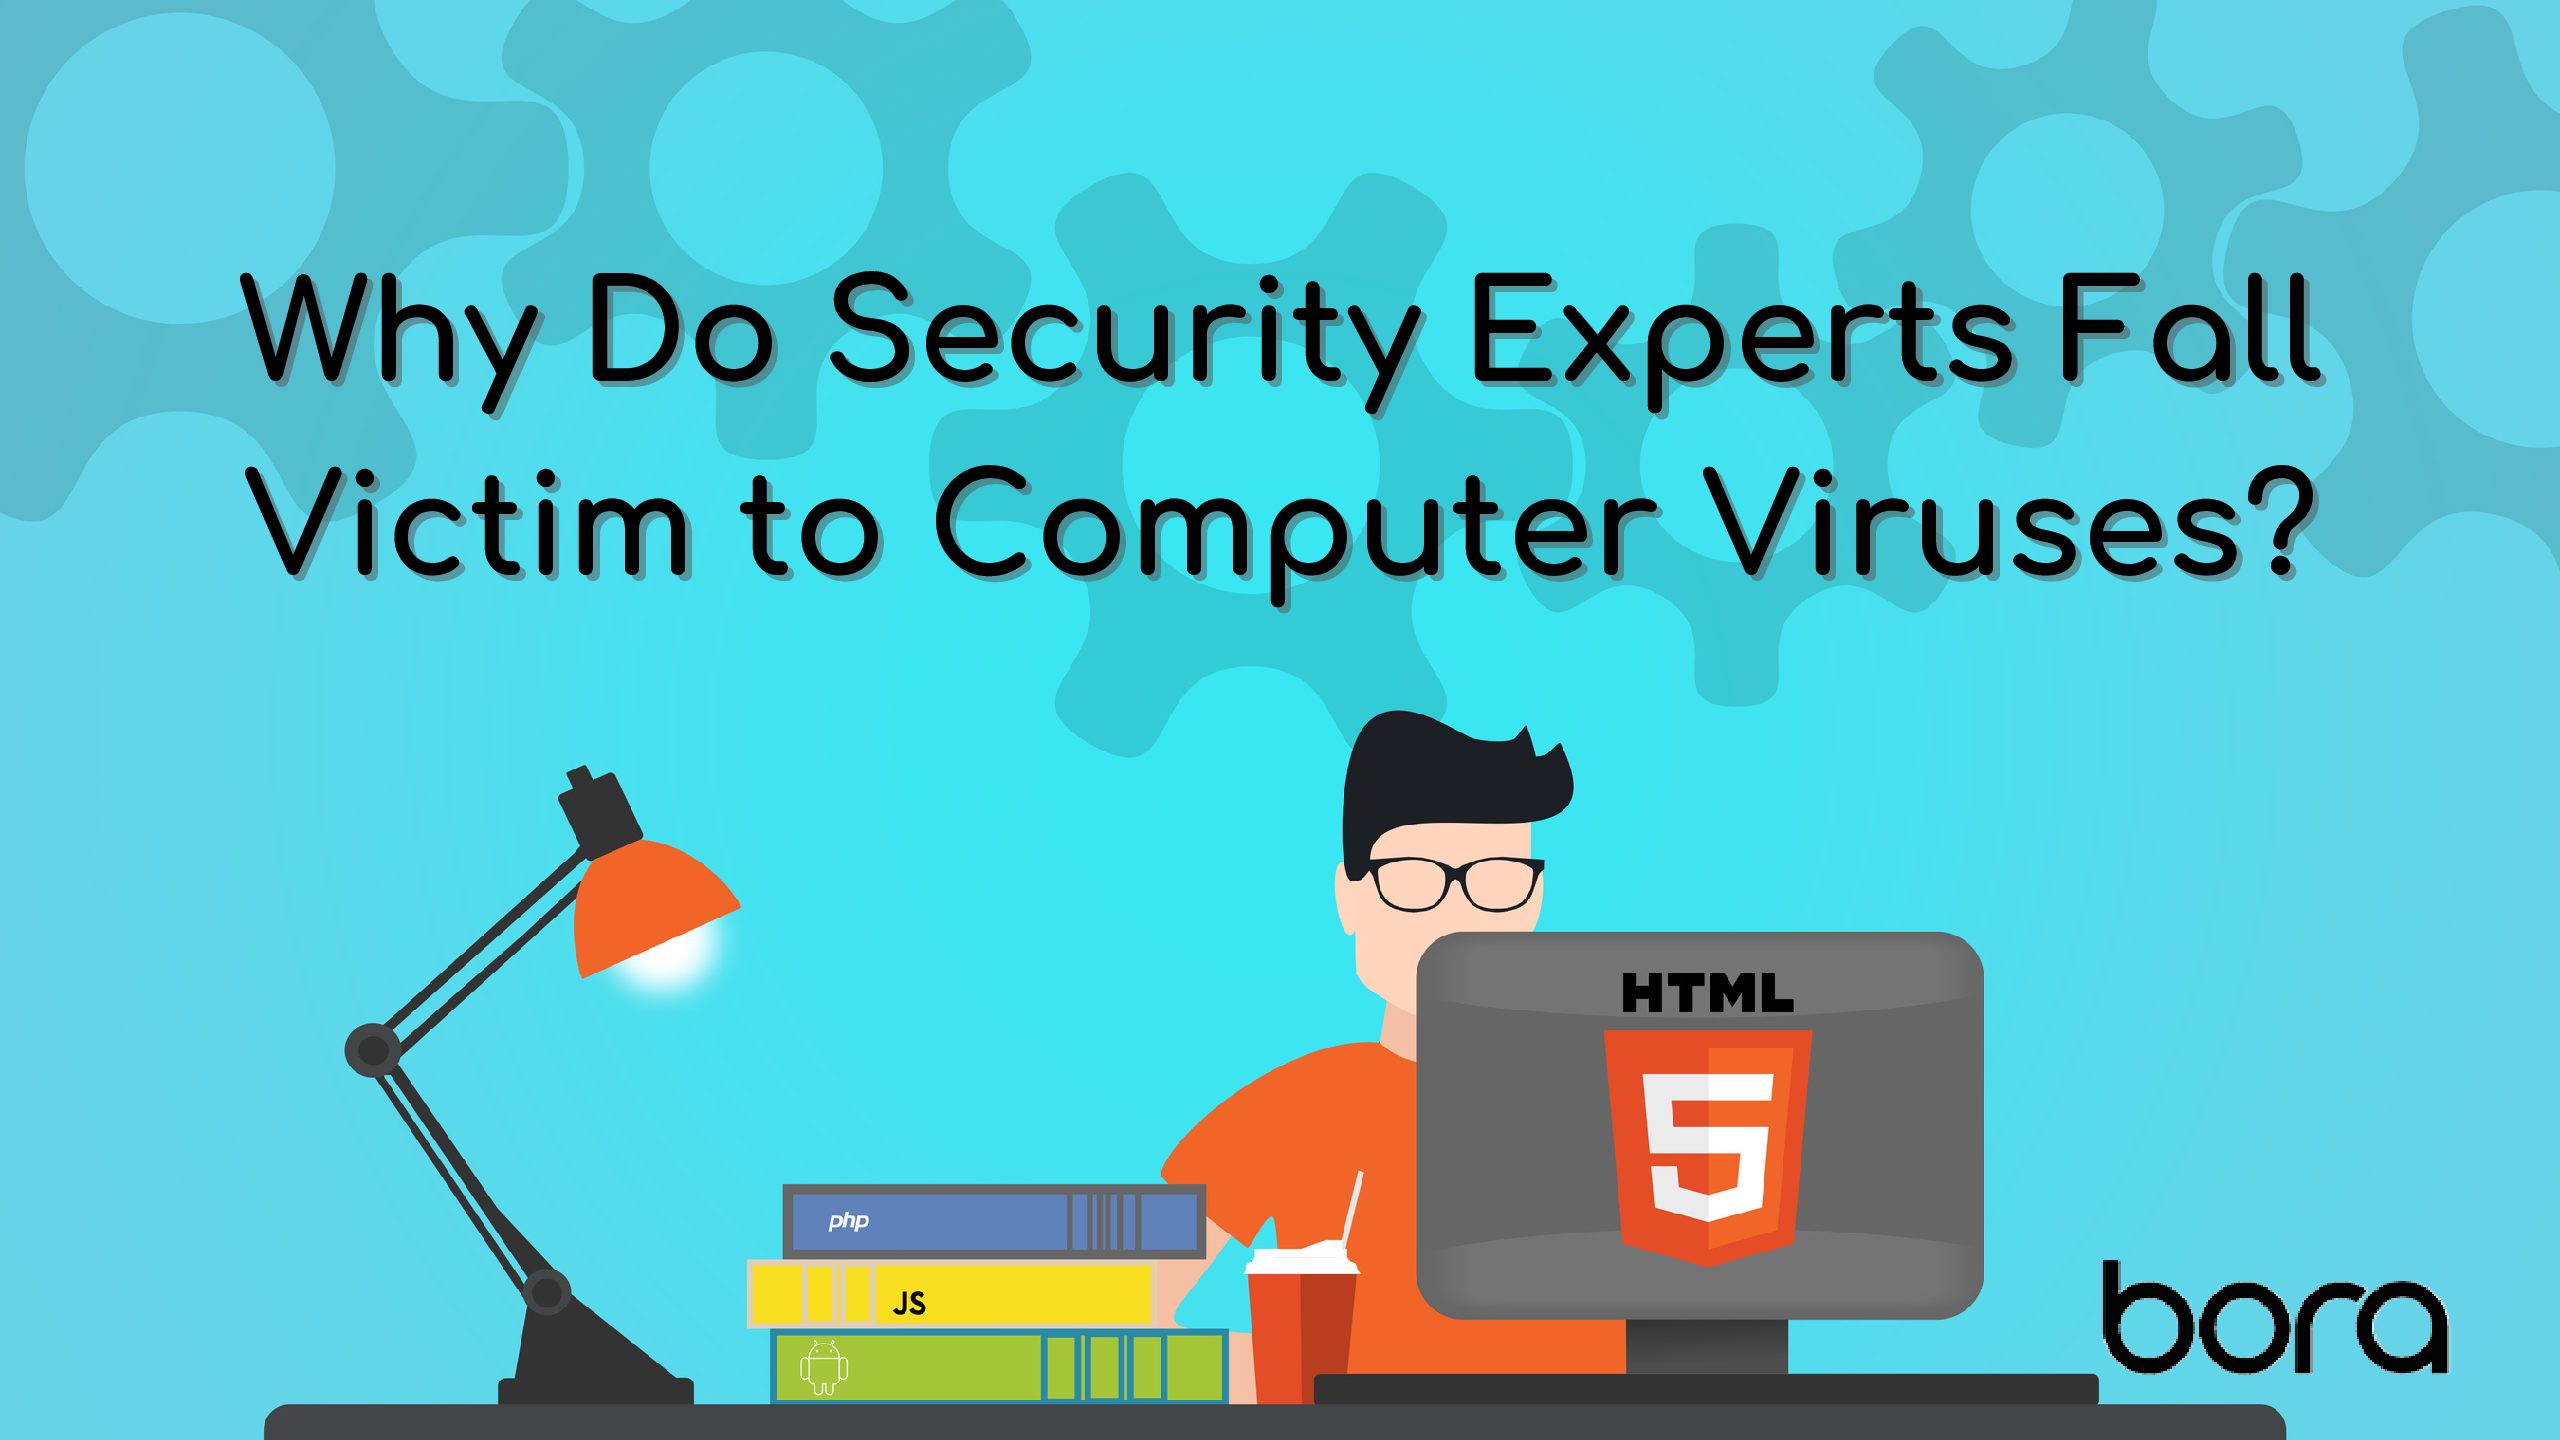 Why Do Security Experts Fall Victim to Computer Viruses?